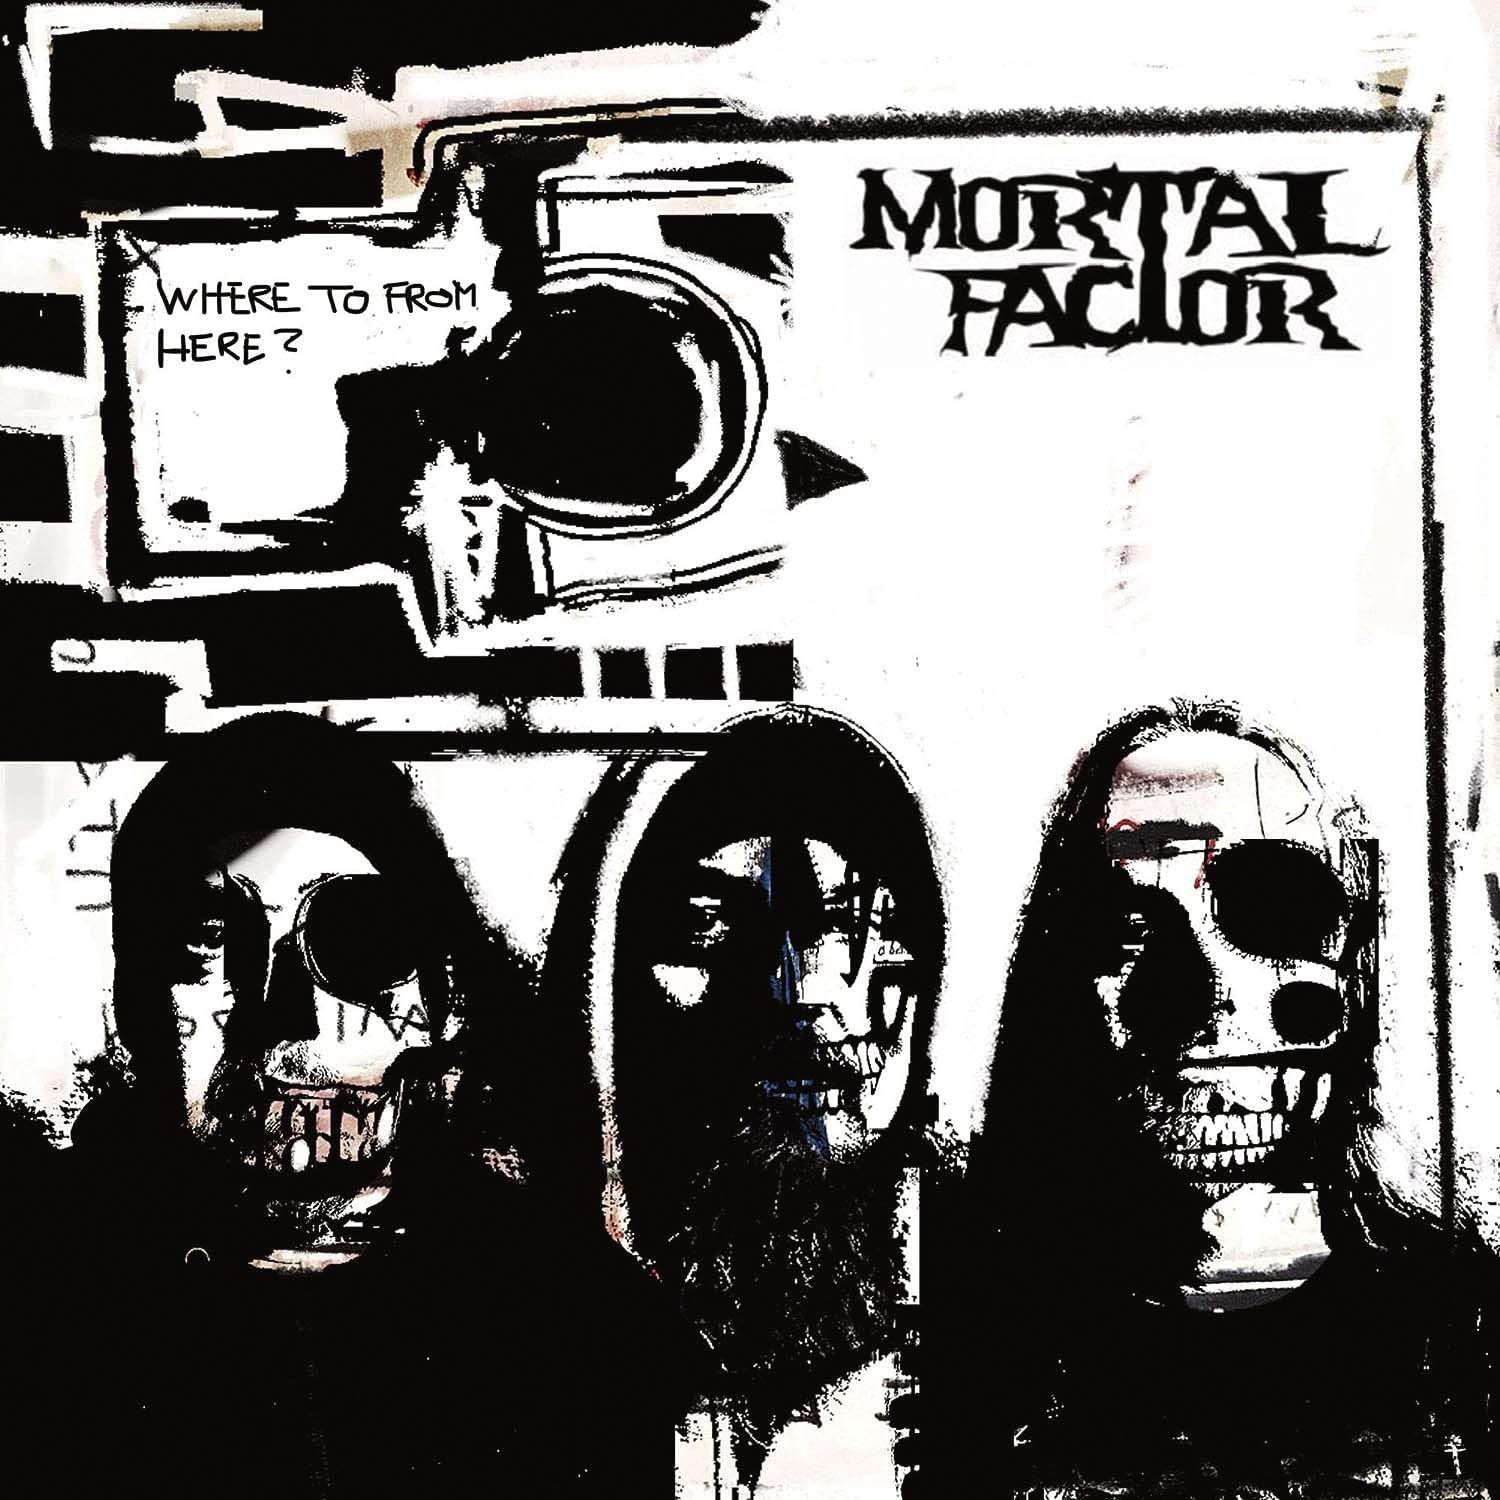 Mortal Factor - Where To From Here?